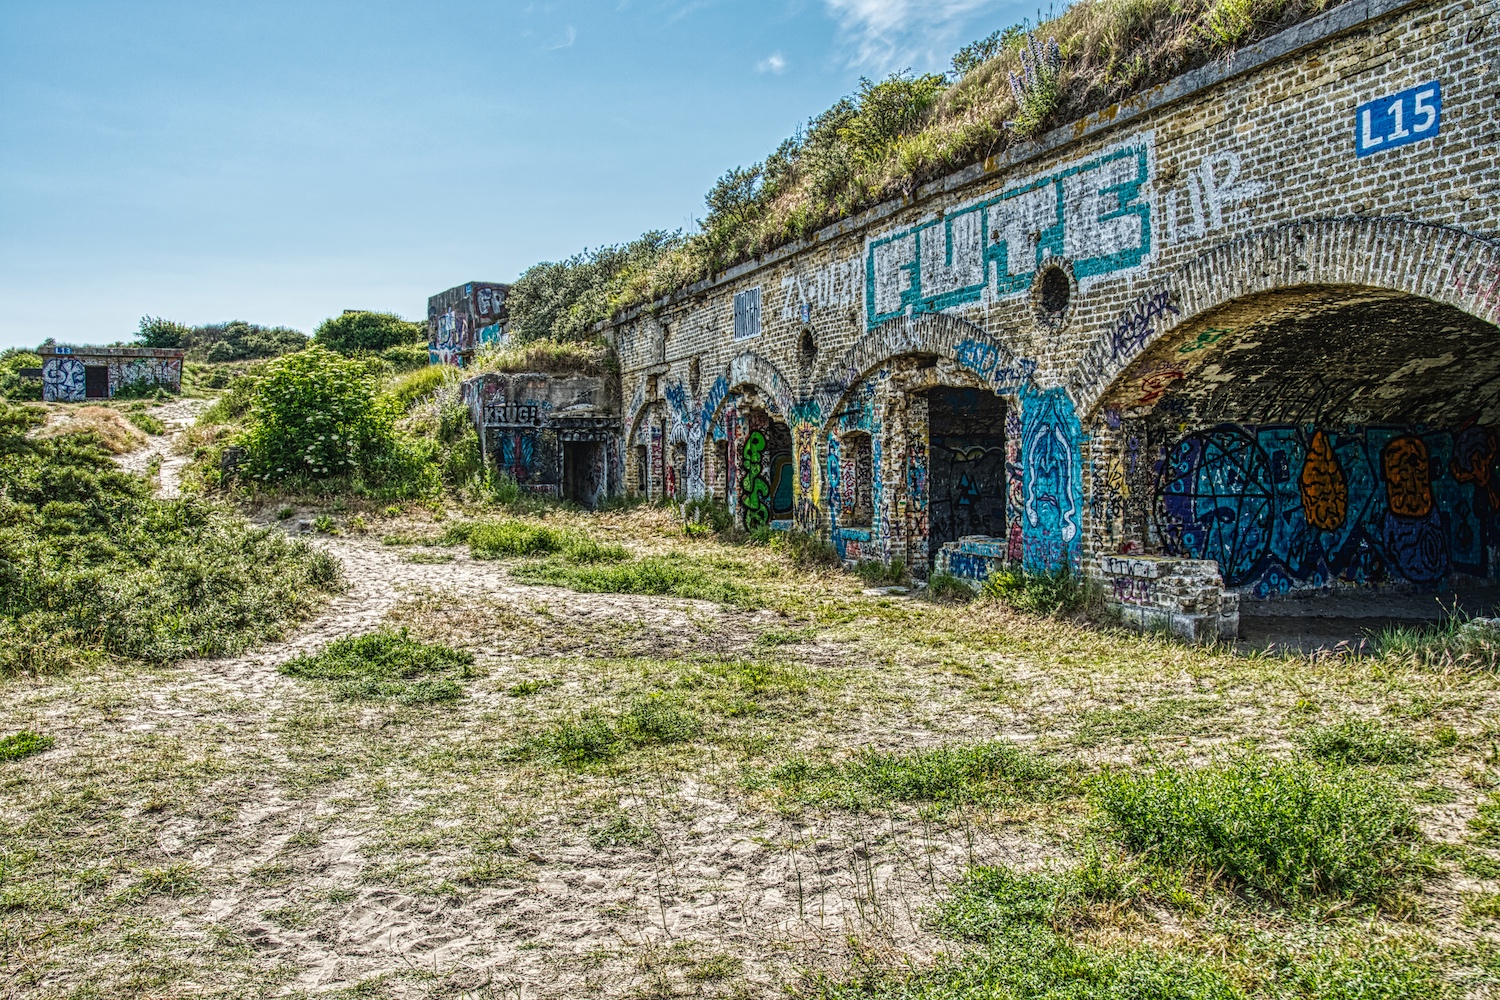 Remains of bunkers from the Second World War